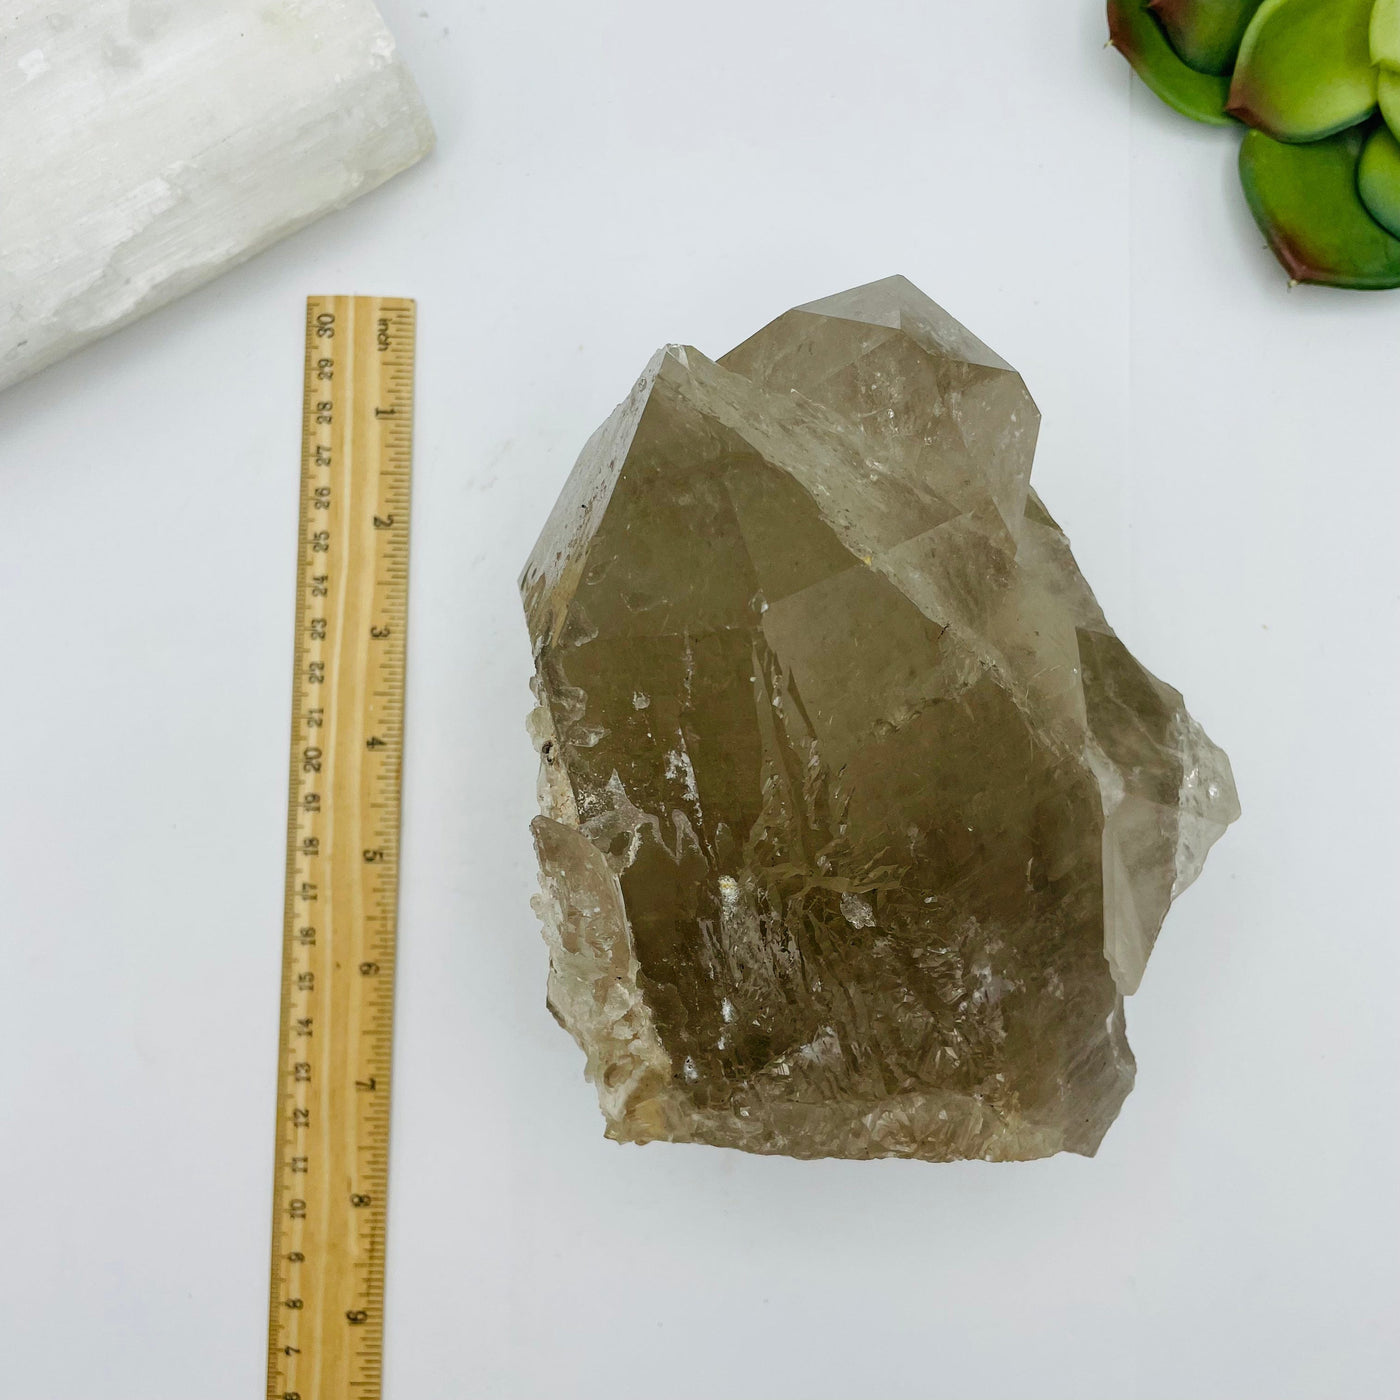 Rutilated quartz cluster next to a ruler for size reference